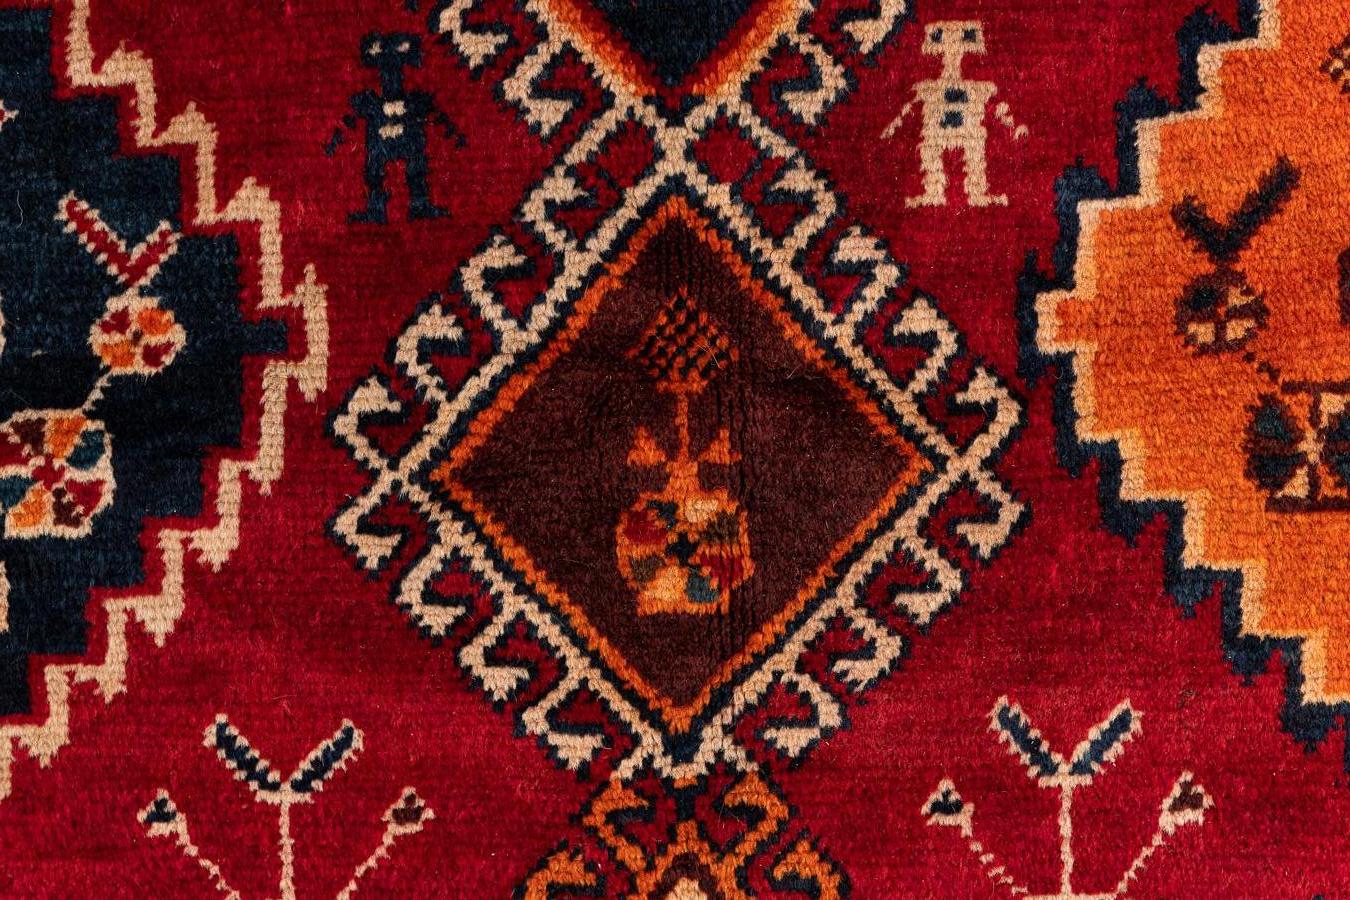 Shiraz – Southern Persia
Splendid antique Persian carpet from the city of Shiraz. This carpet reflects the art of the nomads of southern Persia. The rug features two large central medallions and two smaller ones surrounded by geometric and human